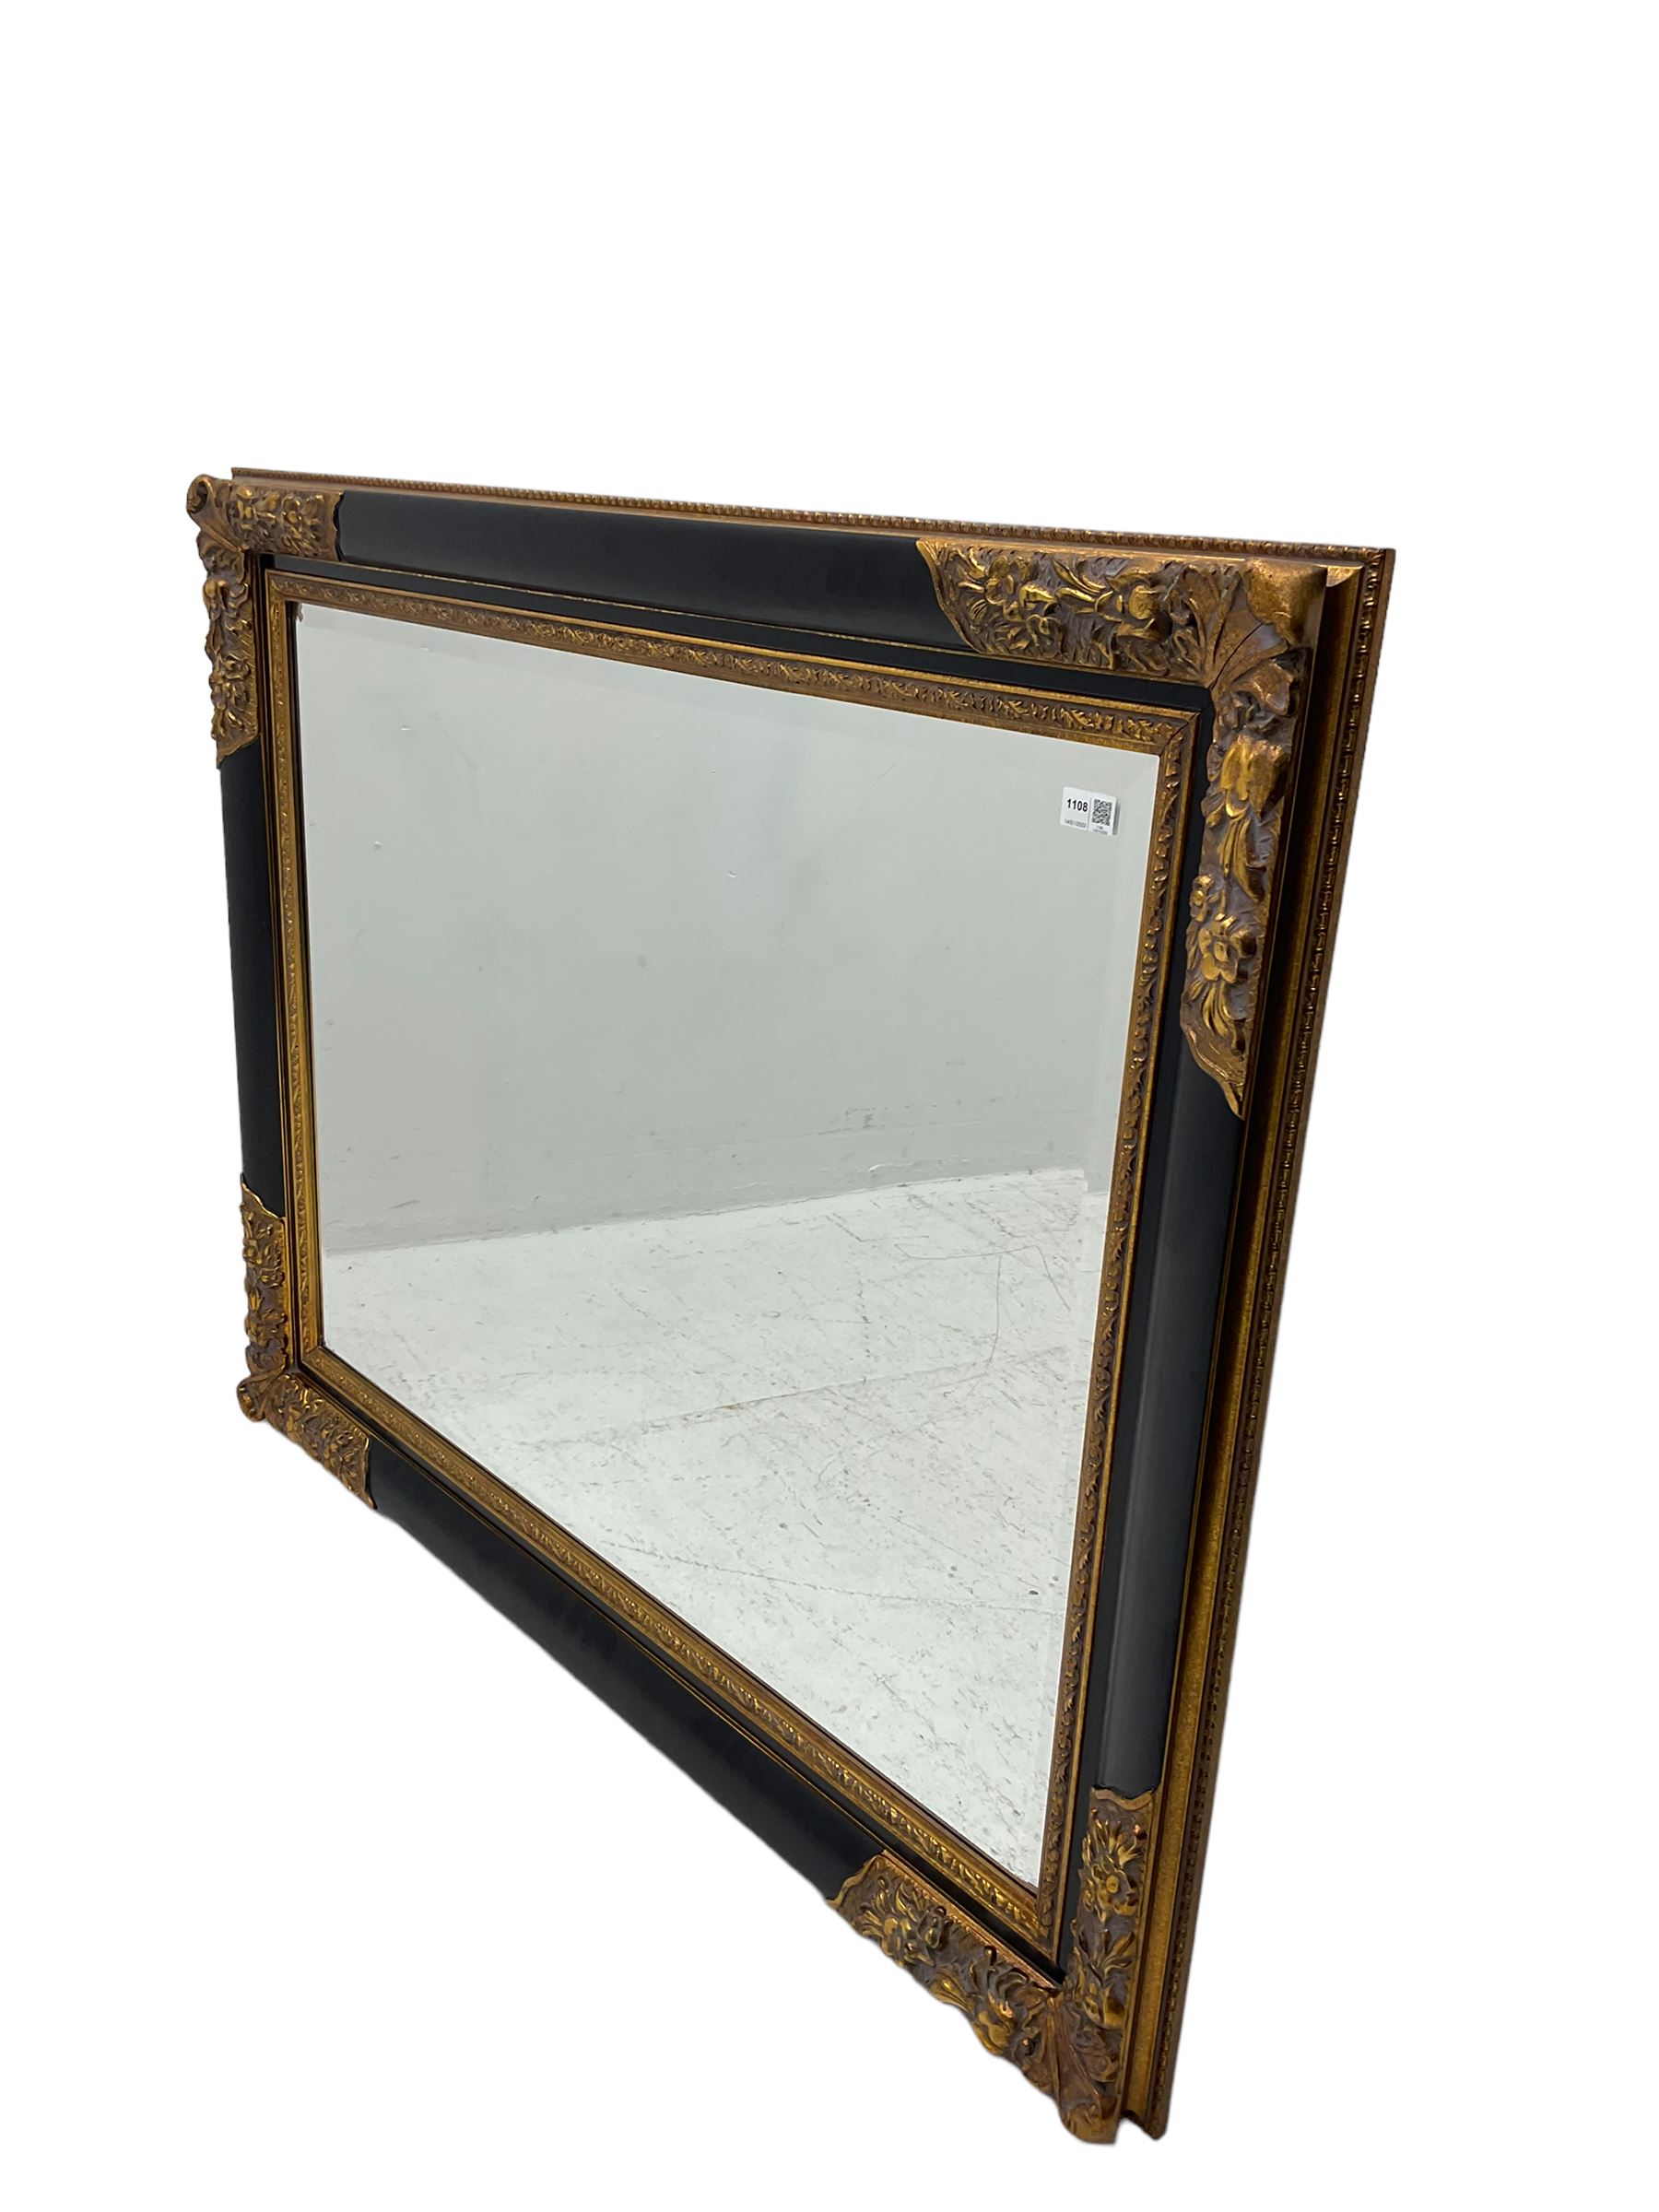 Gilt and ebonised framed wall mirror - Image 3 of 4